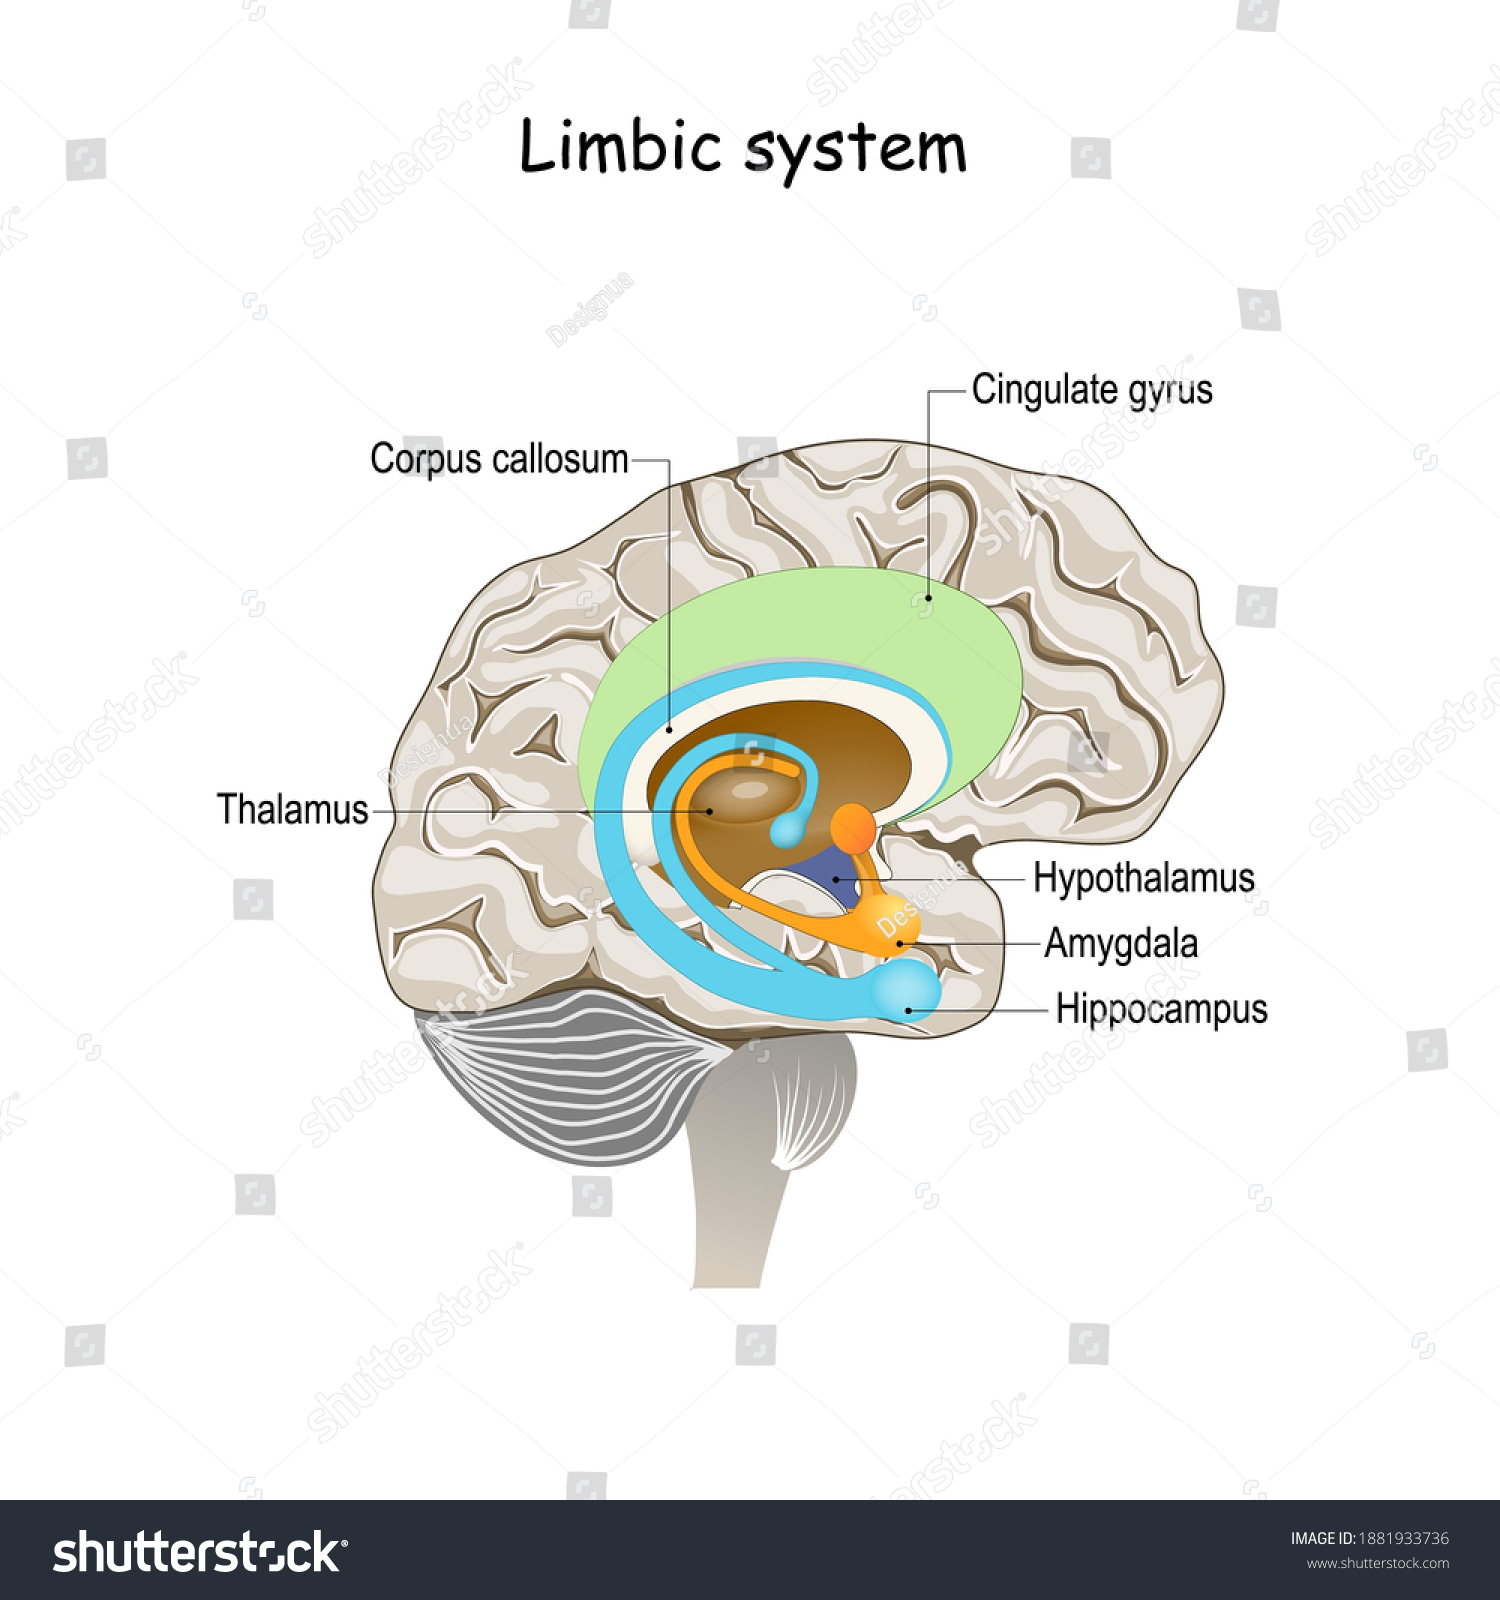 SVG of limbic system. Cross section of the human brain. Anatomical components of limbic system: Mammillary body, basal ganglia, pituitary gland, amygdala, hippocampus, thalamus, cingulate gyrus svg